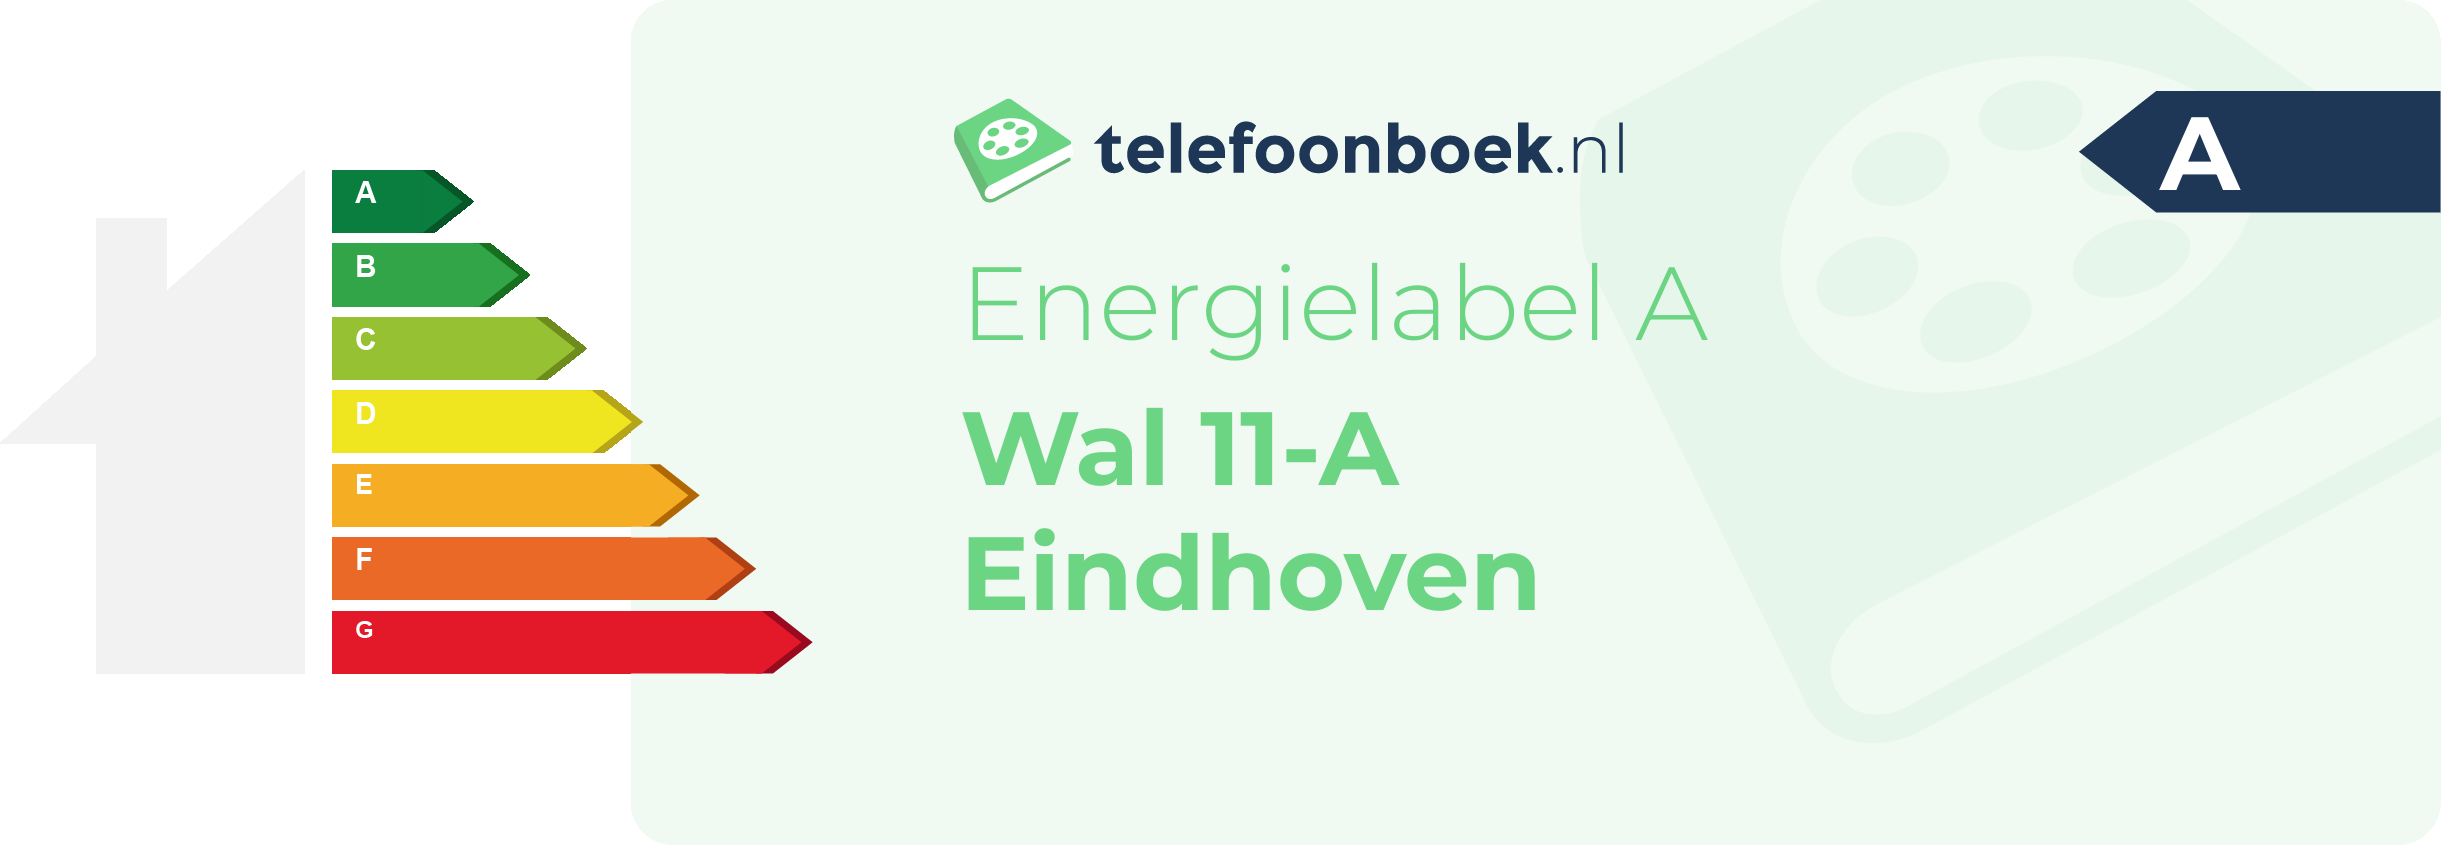 Energielabel Wal 11-A Eindhoven